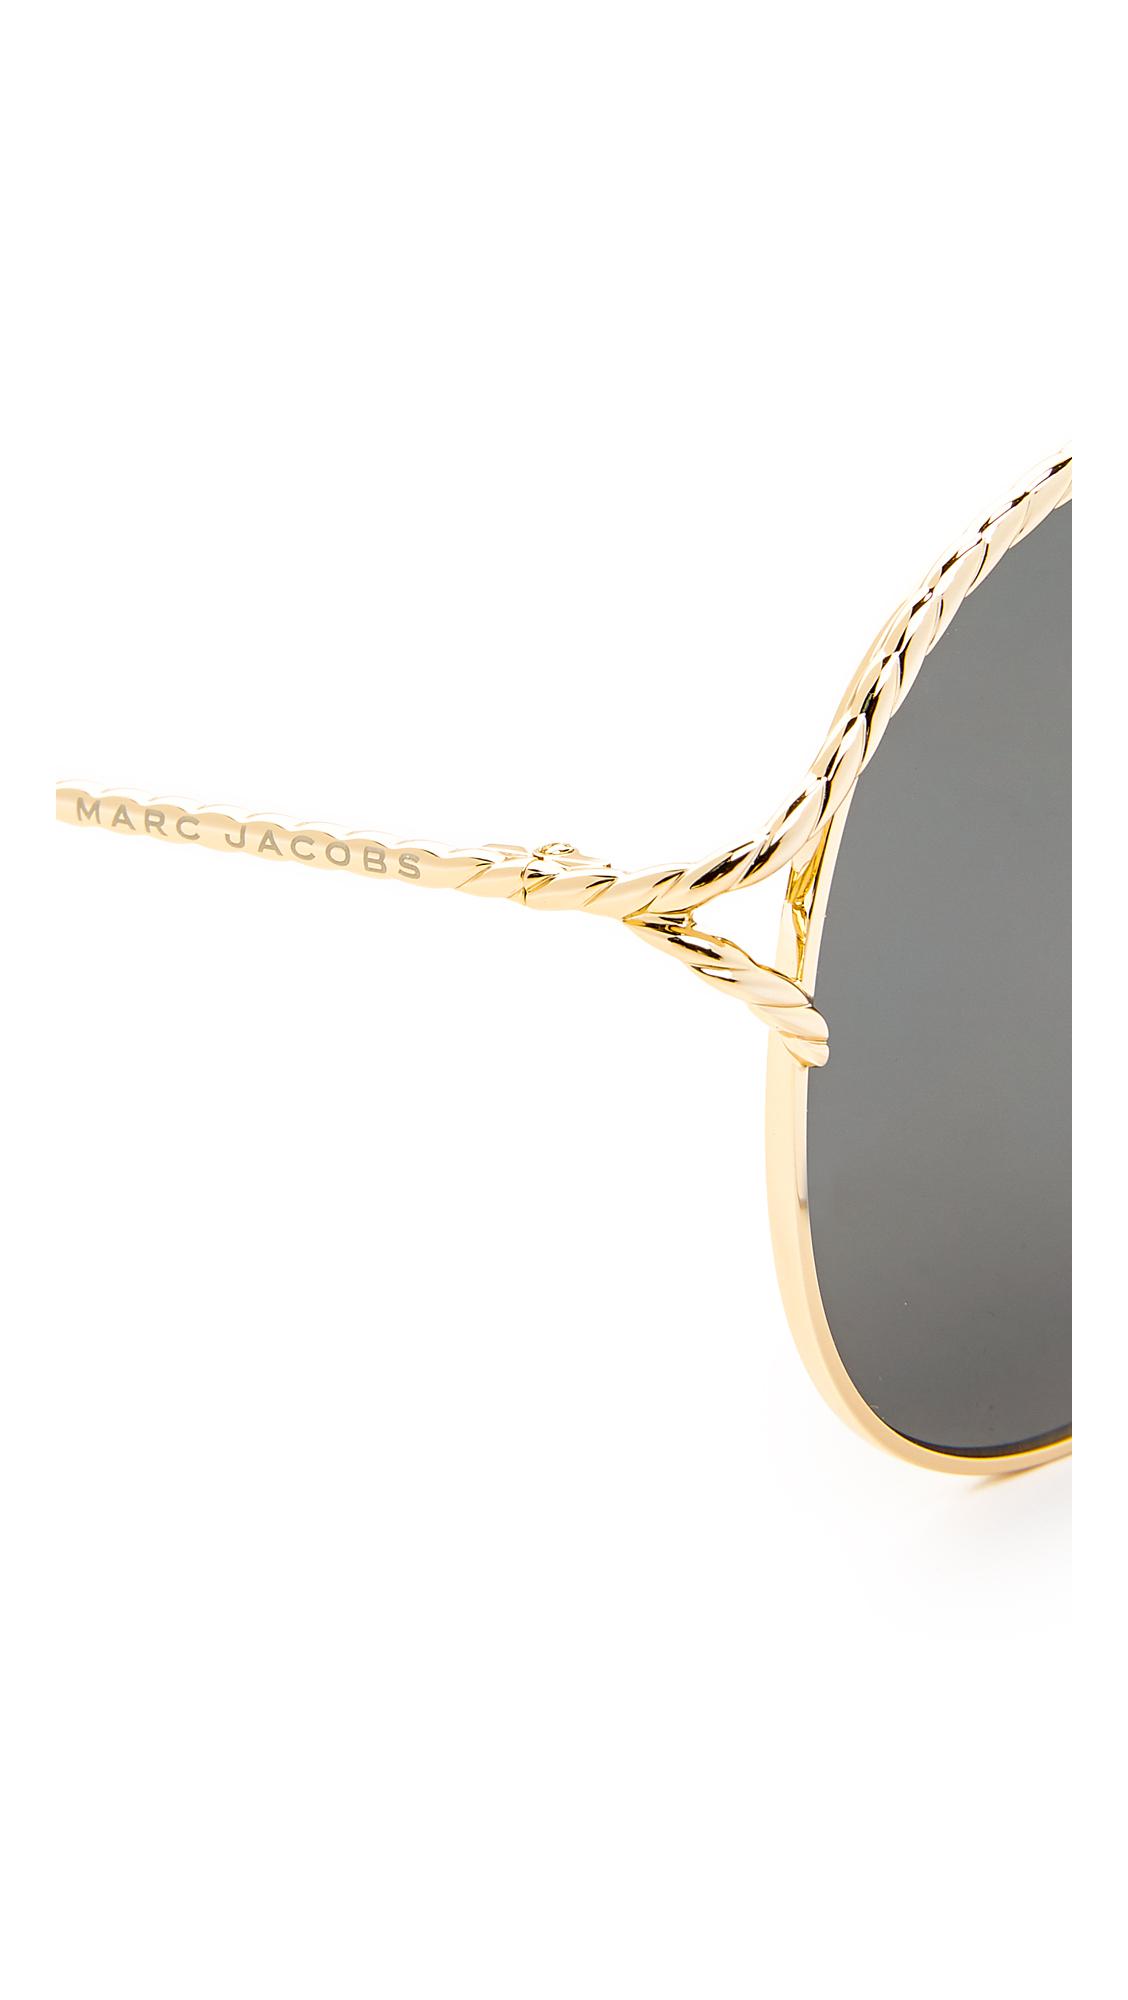 Marc Jacobs Rope Aviator Sunglasses in Gold Black/Grey (Gray) - Lyst